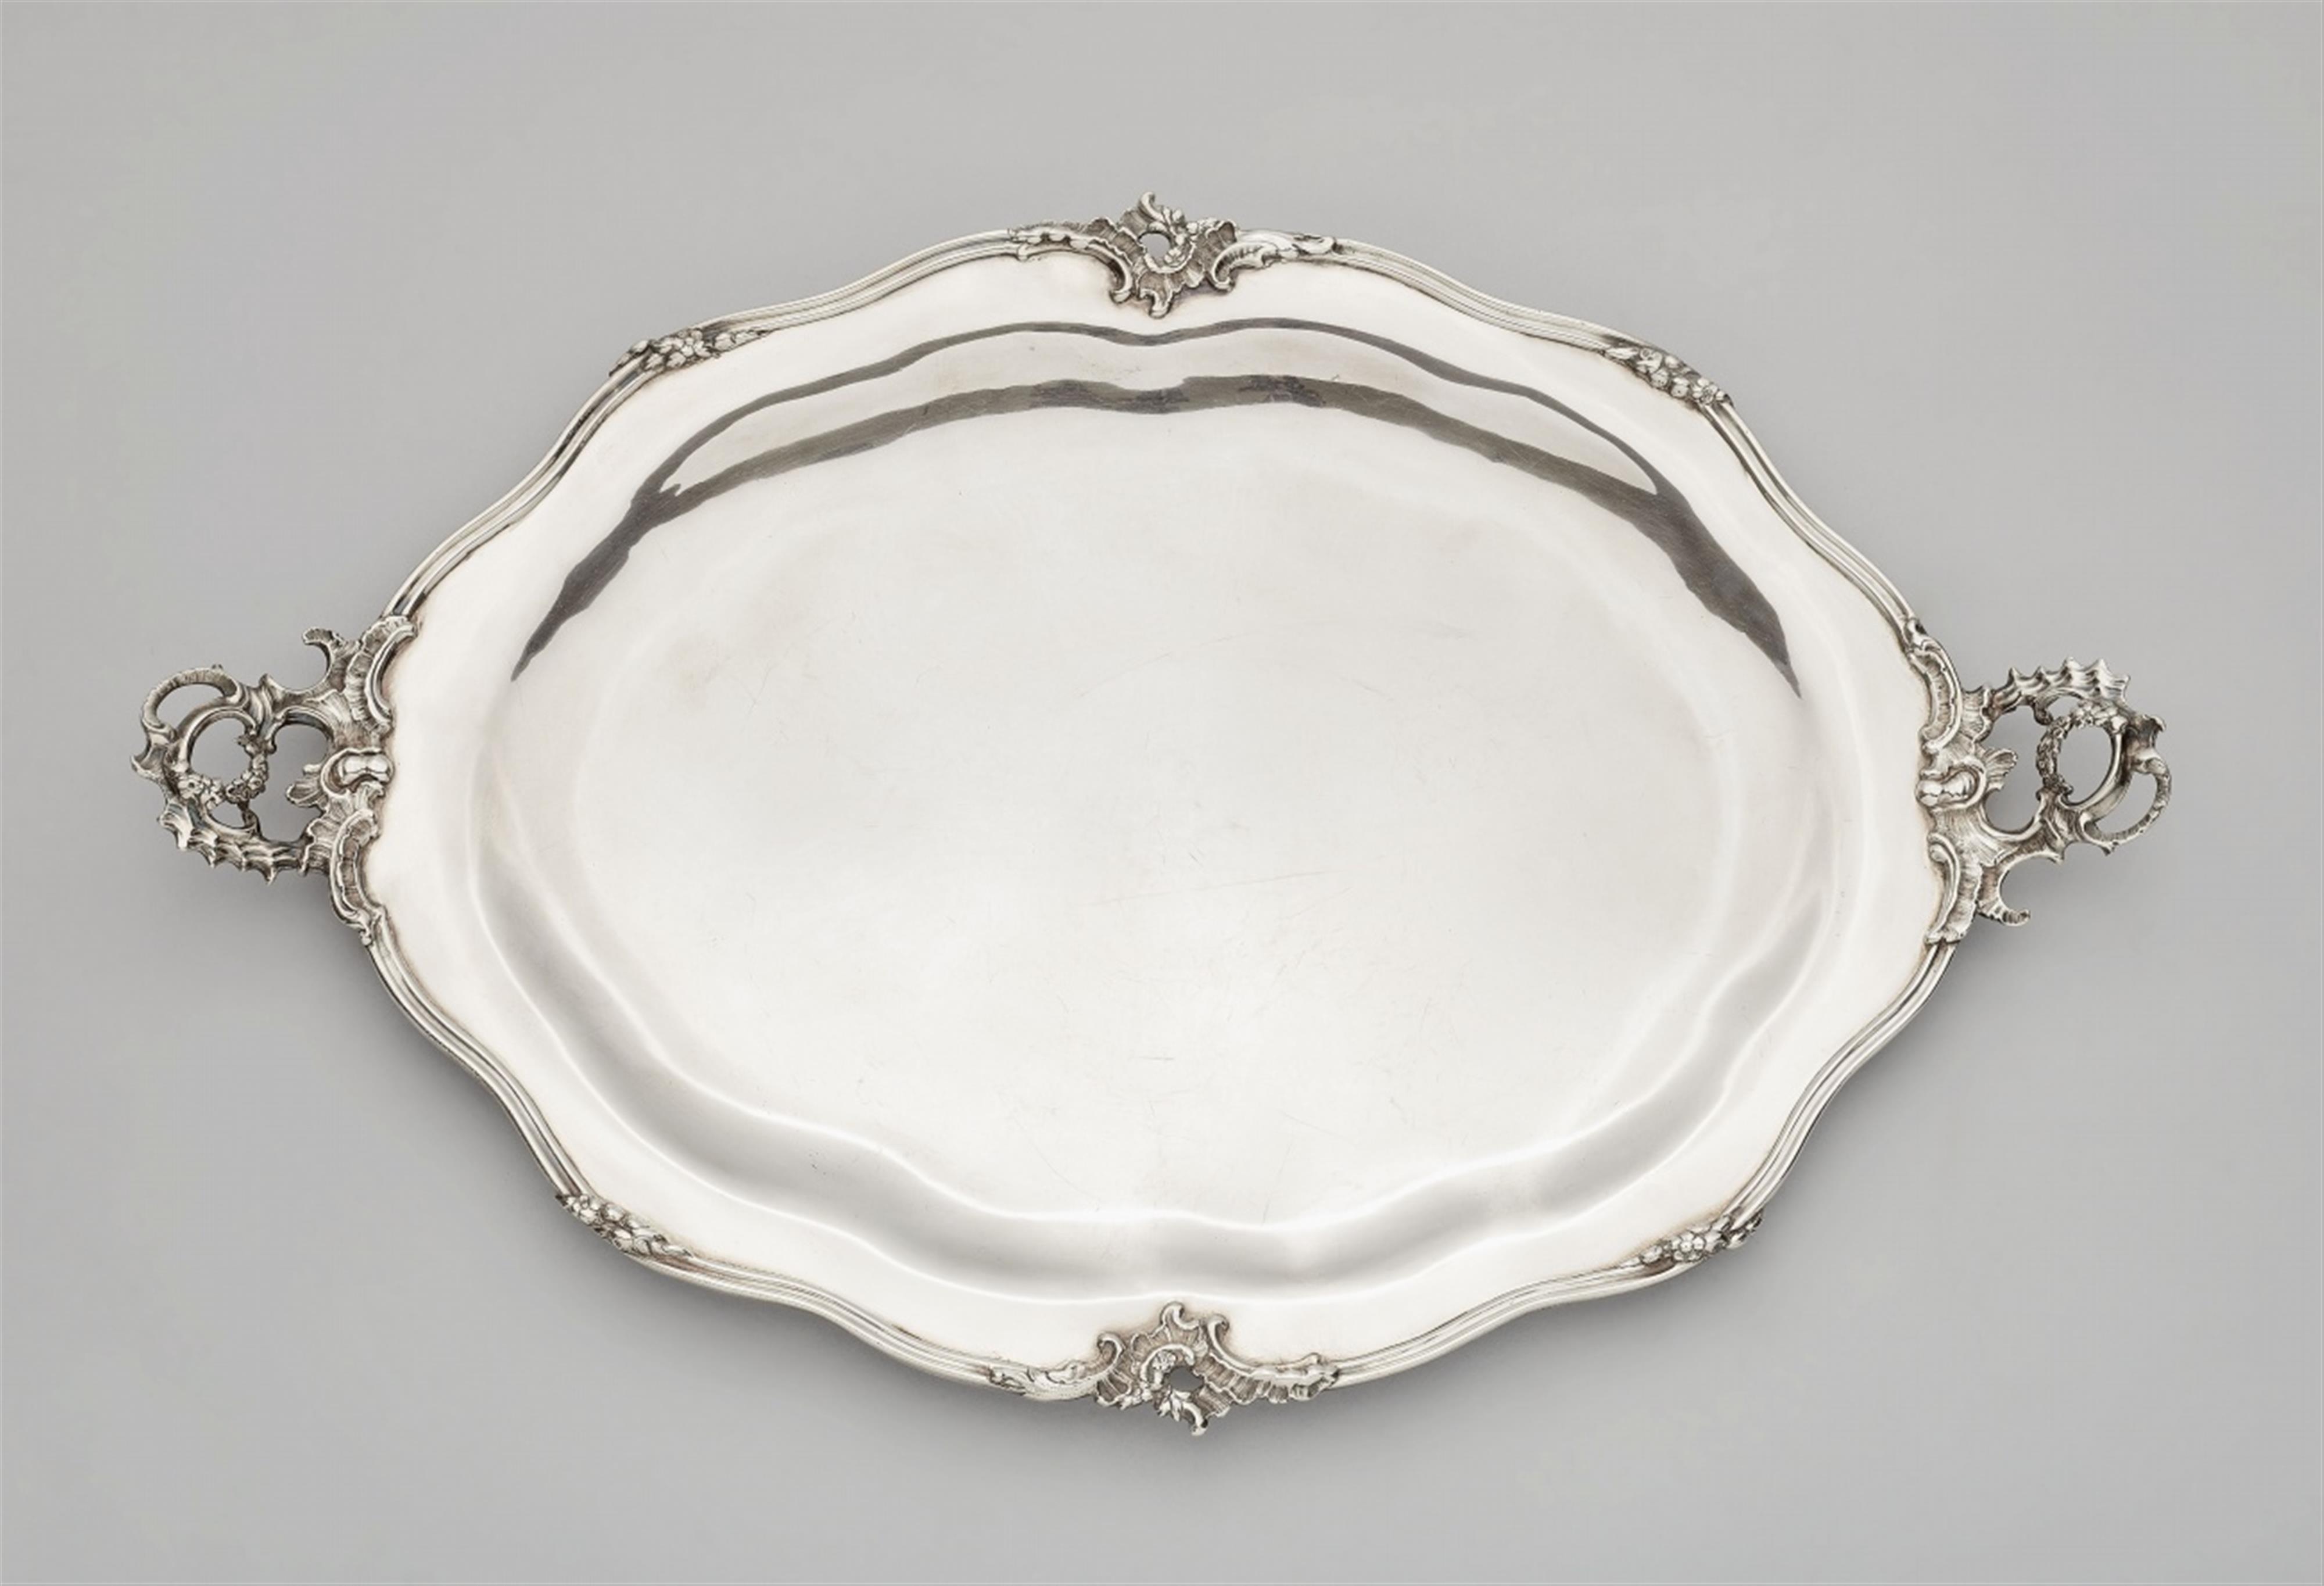 A large Augsburg silver platter - 